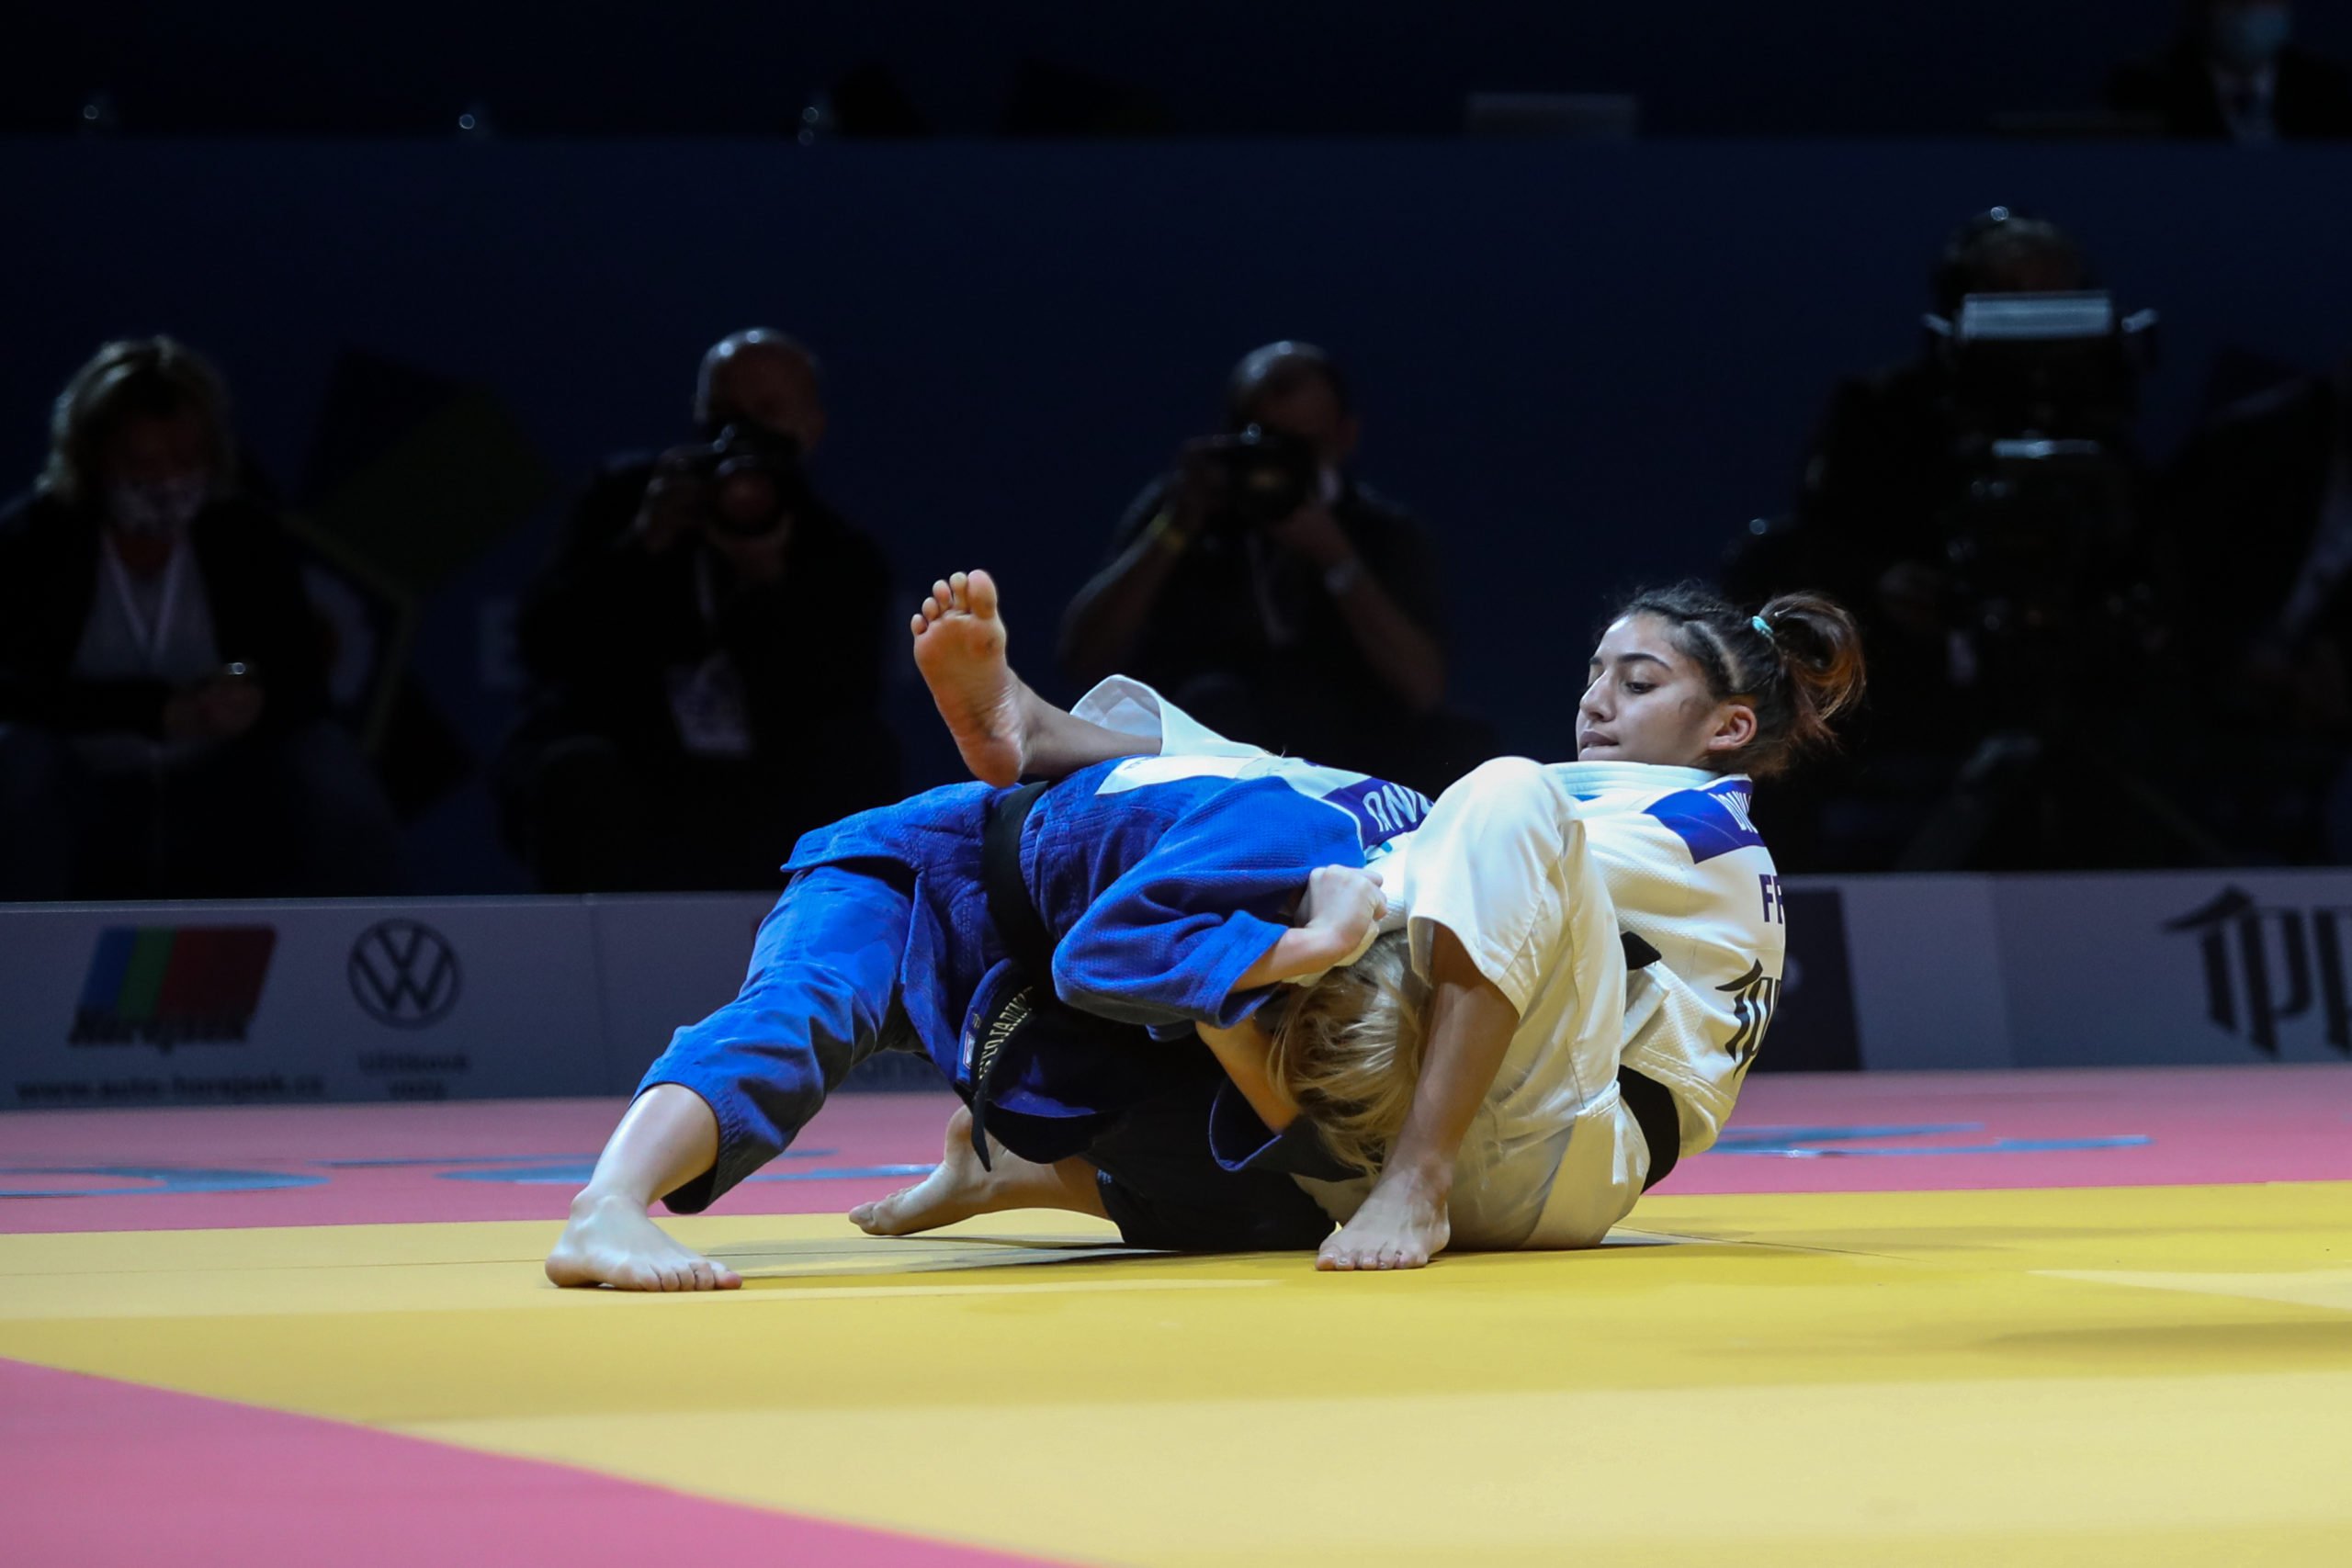 IJF SIGN OFF 2021 WITH ABU DHABI GRAND SLAM